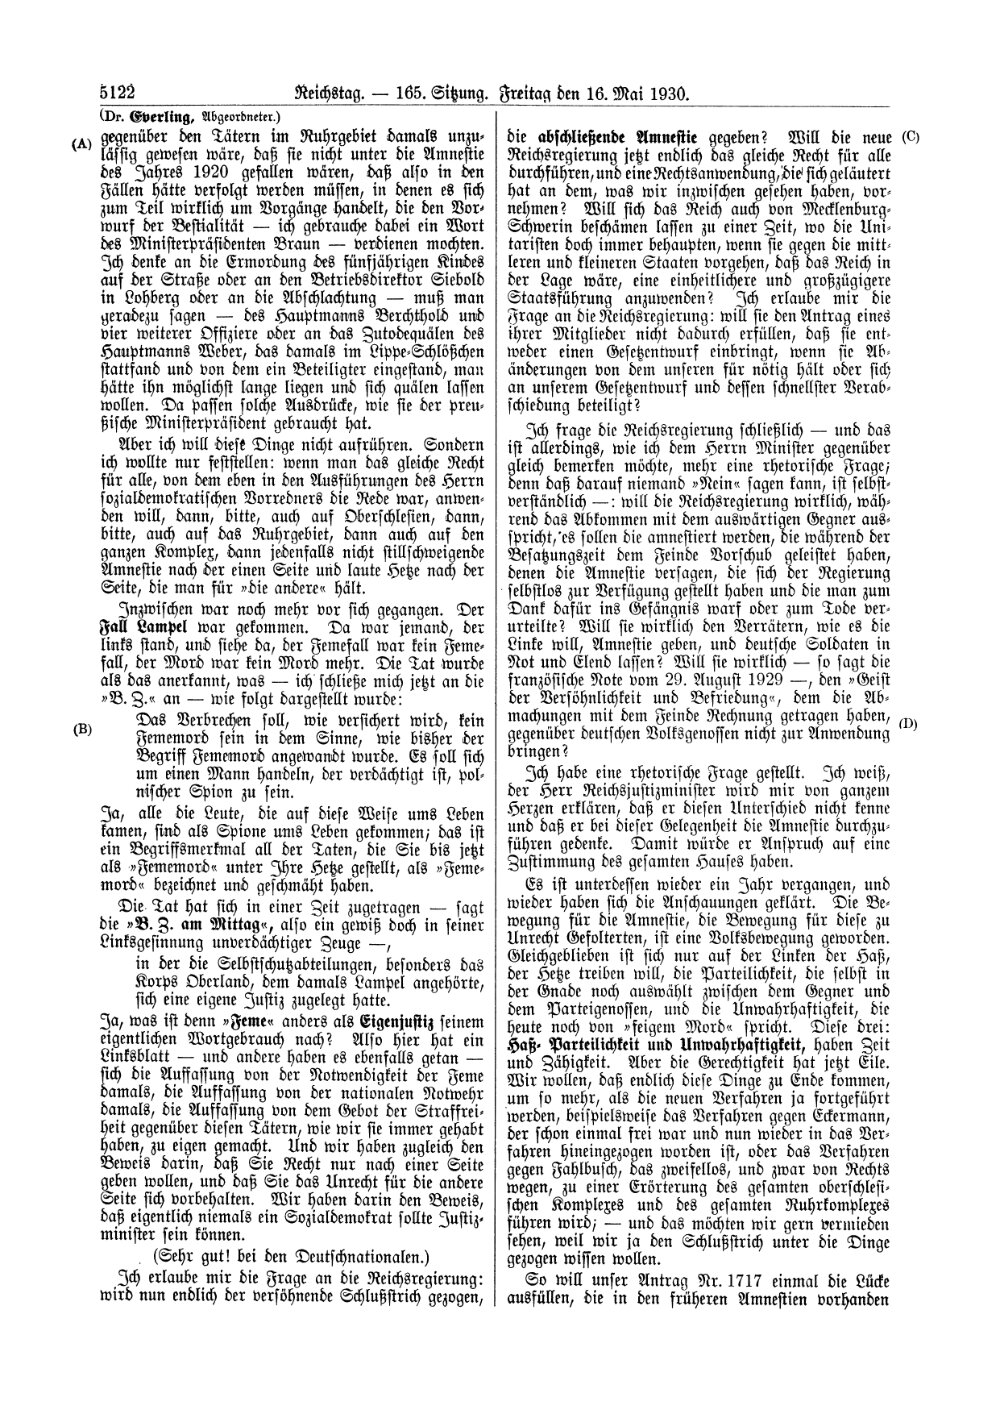 Scan of page 5122